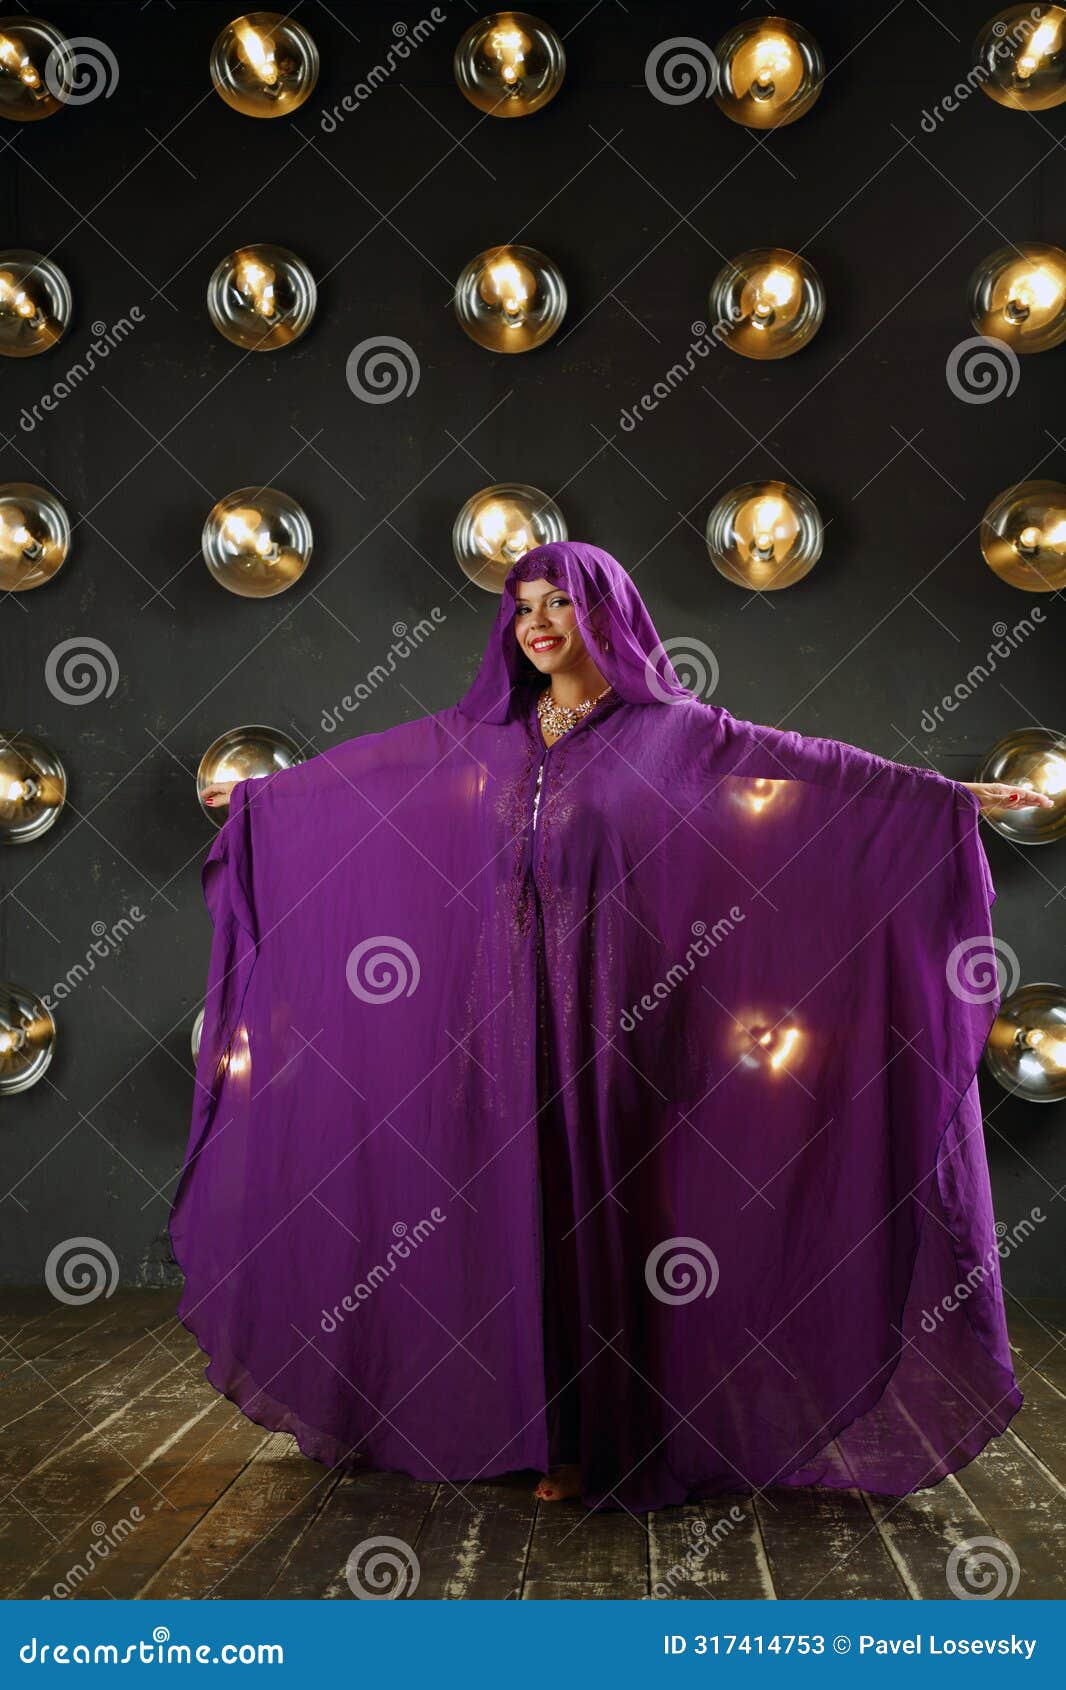 woman in purple mantle poses near wall with lamps